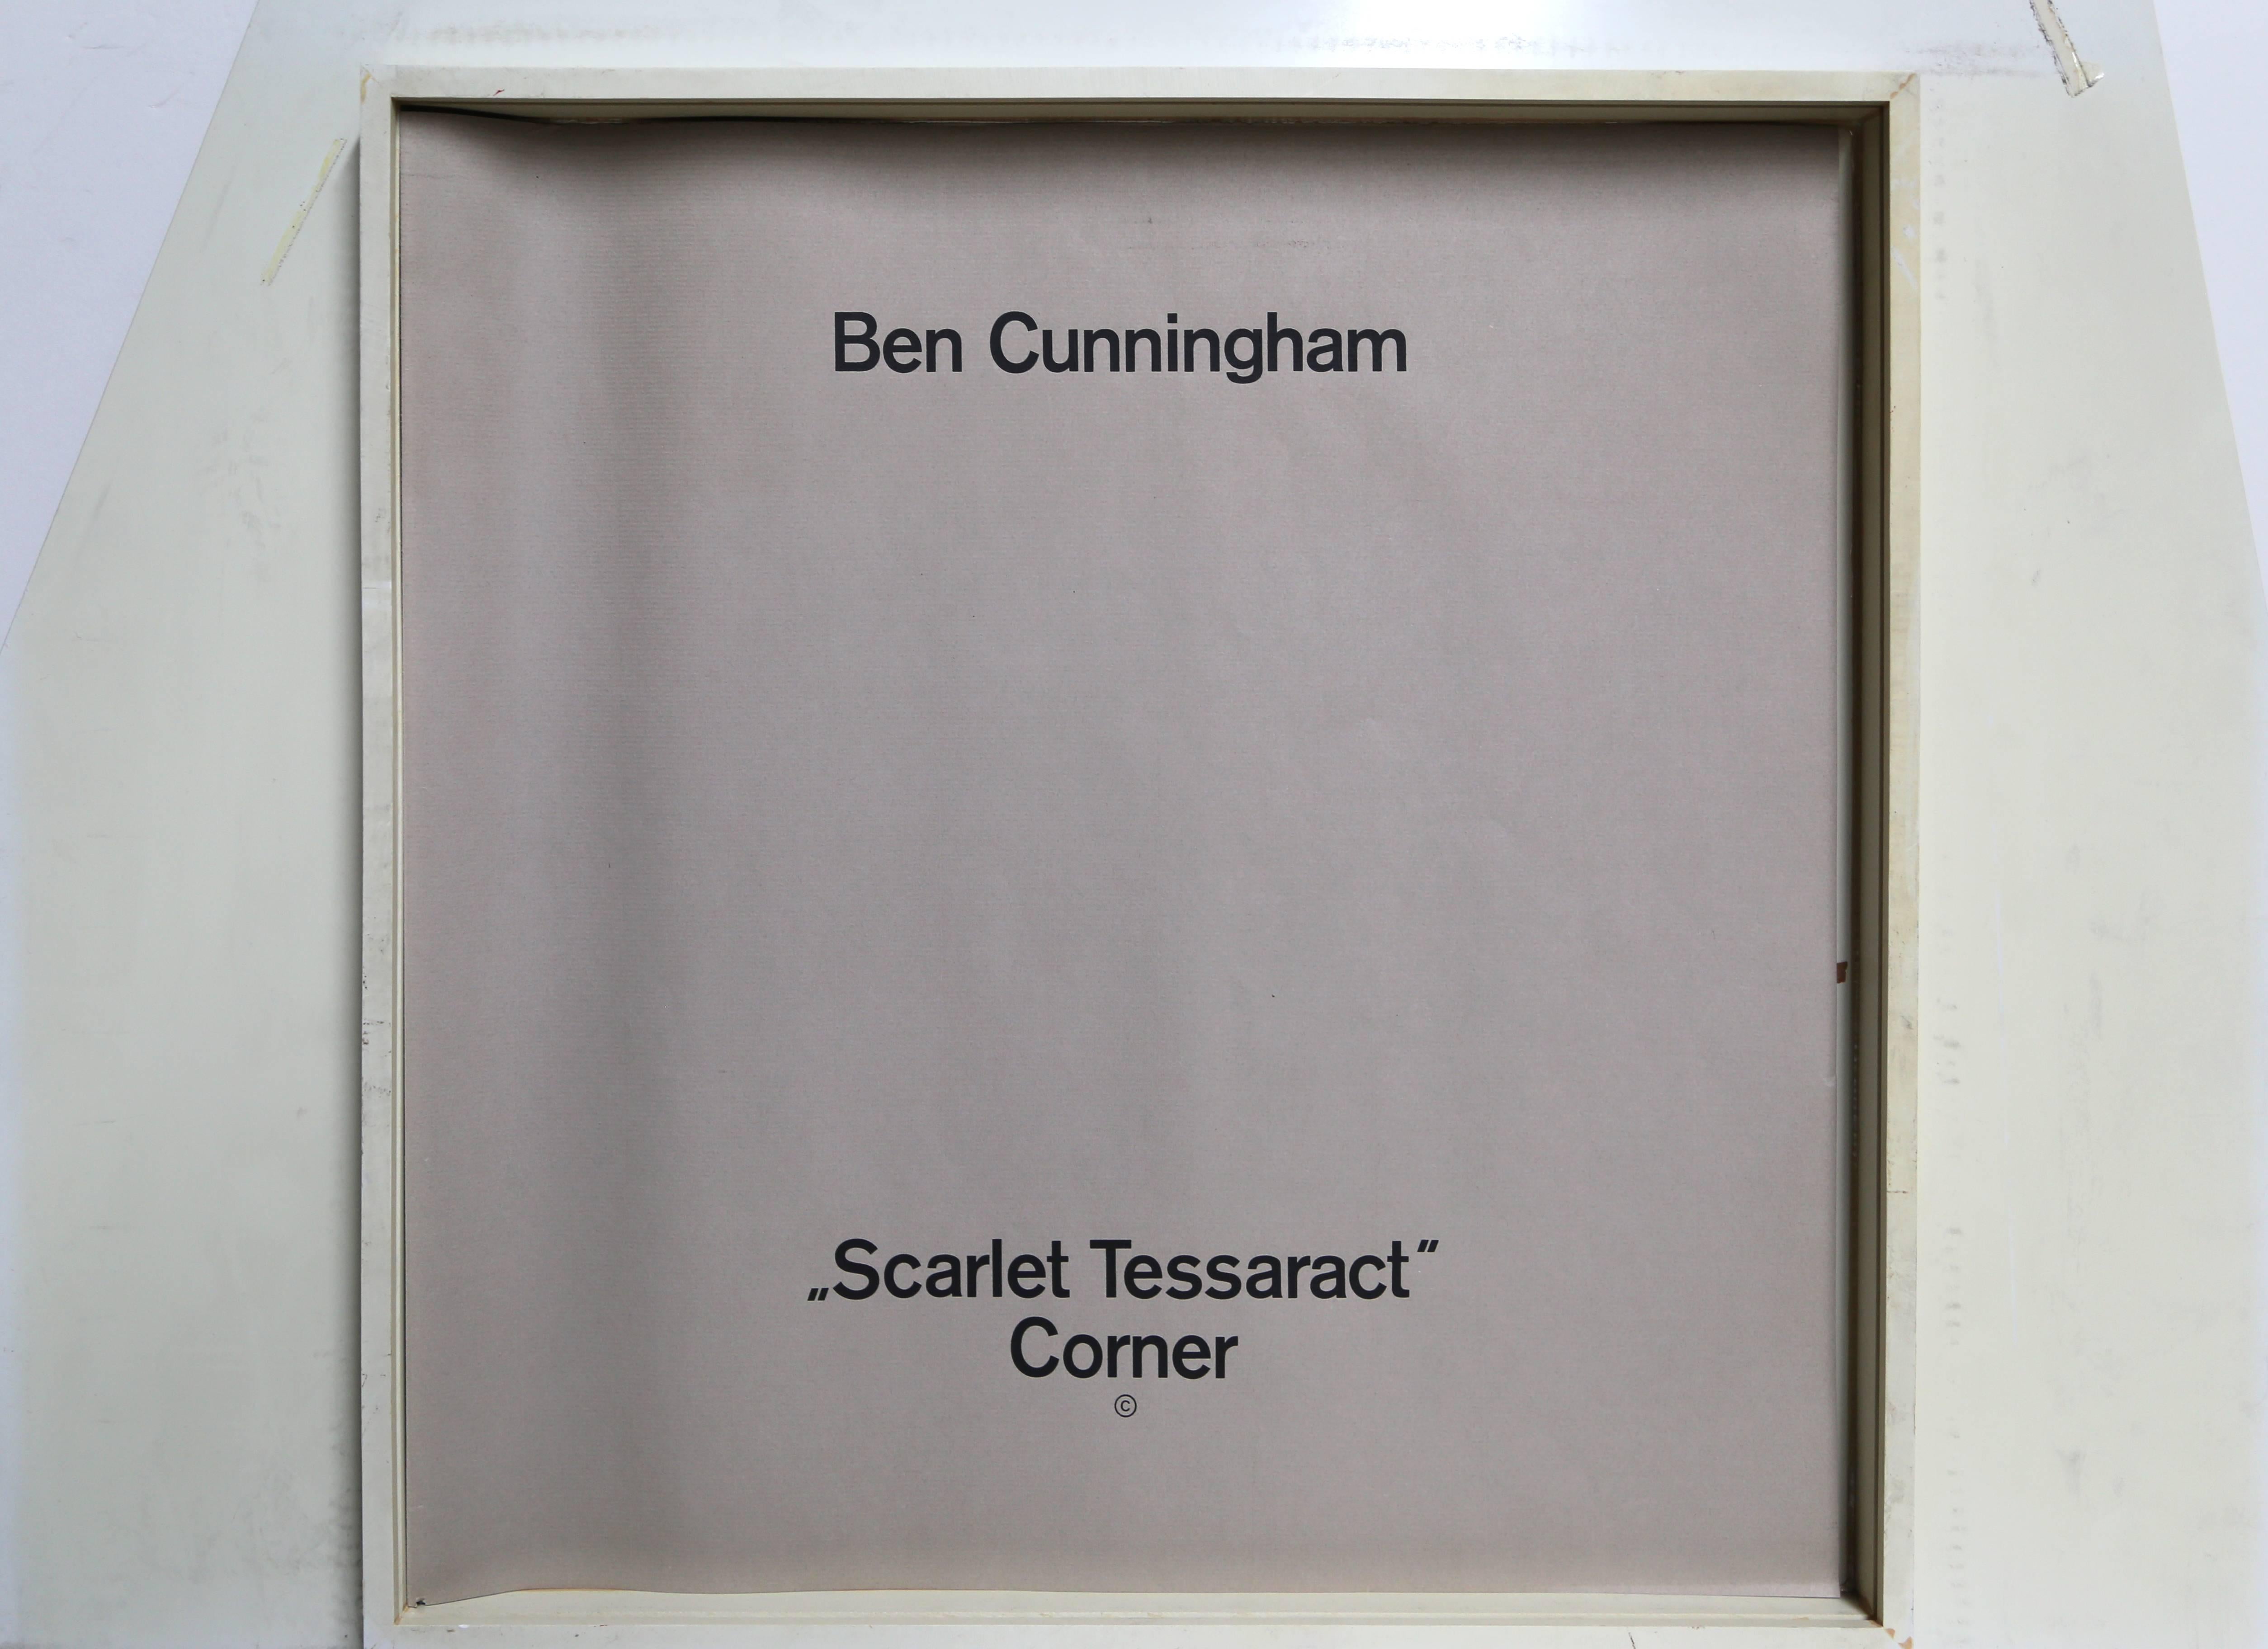 Artist: Ben Cunningham (American, 1904-1975)
Title: Scarlet Tesseract Corner
Year: circa 1970
Medium: Set of Two Silkscreens on Plastic Panel, signed and numbered verso
Edition: 125
Size of each panel: 30 x 30 inches
Size: 30 x 60 inches
Printer: